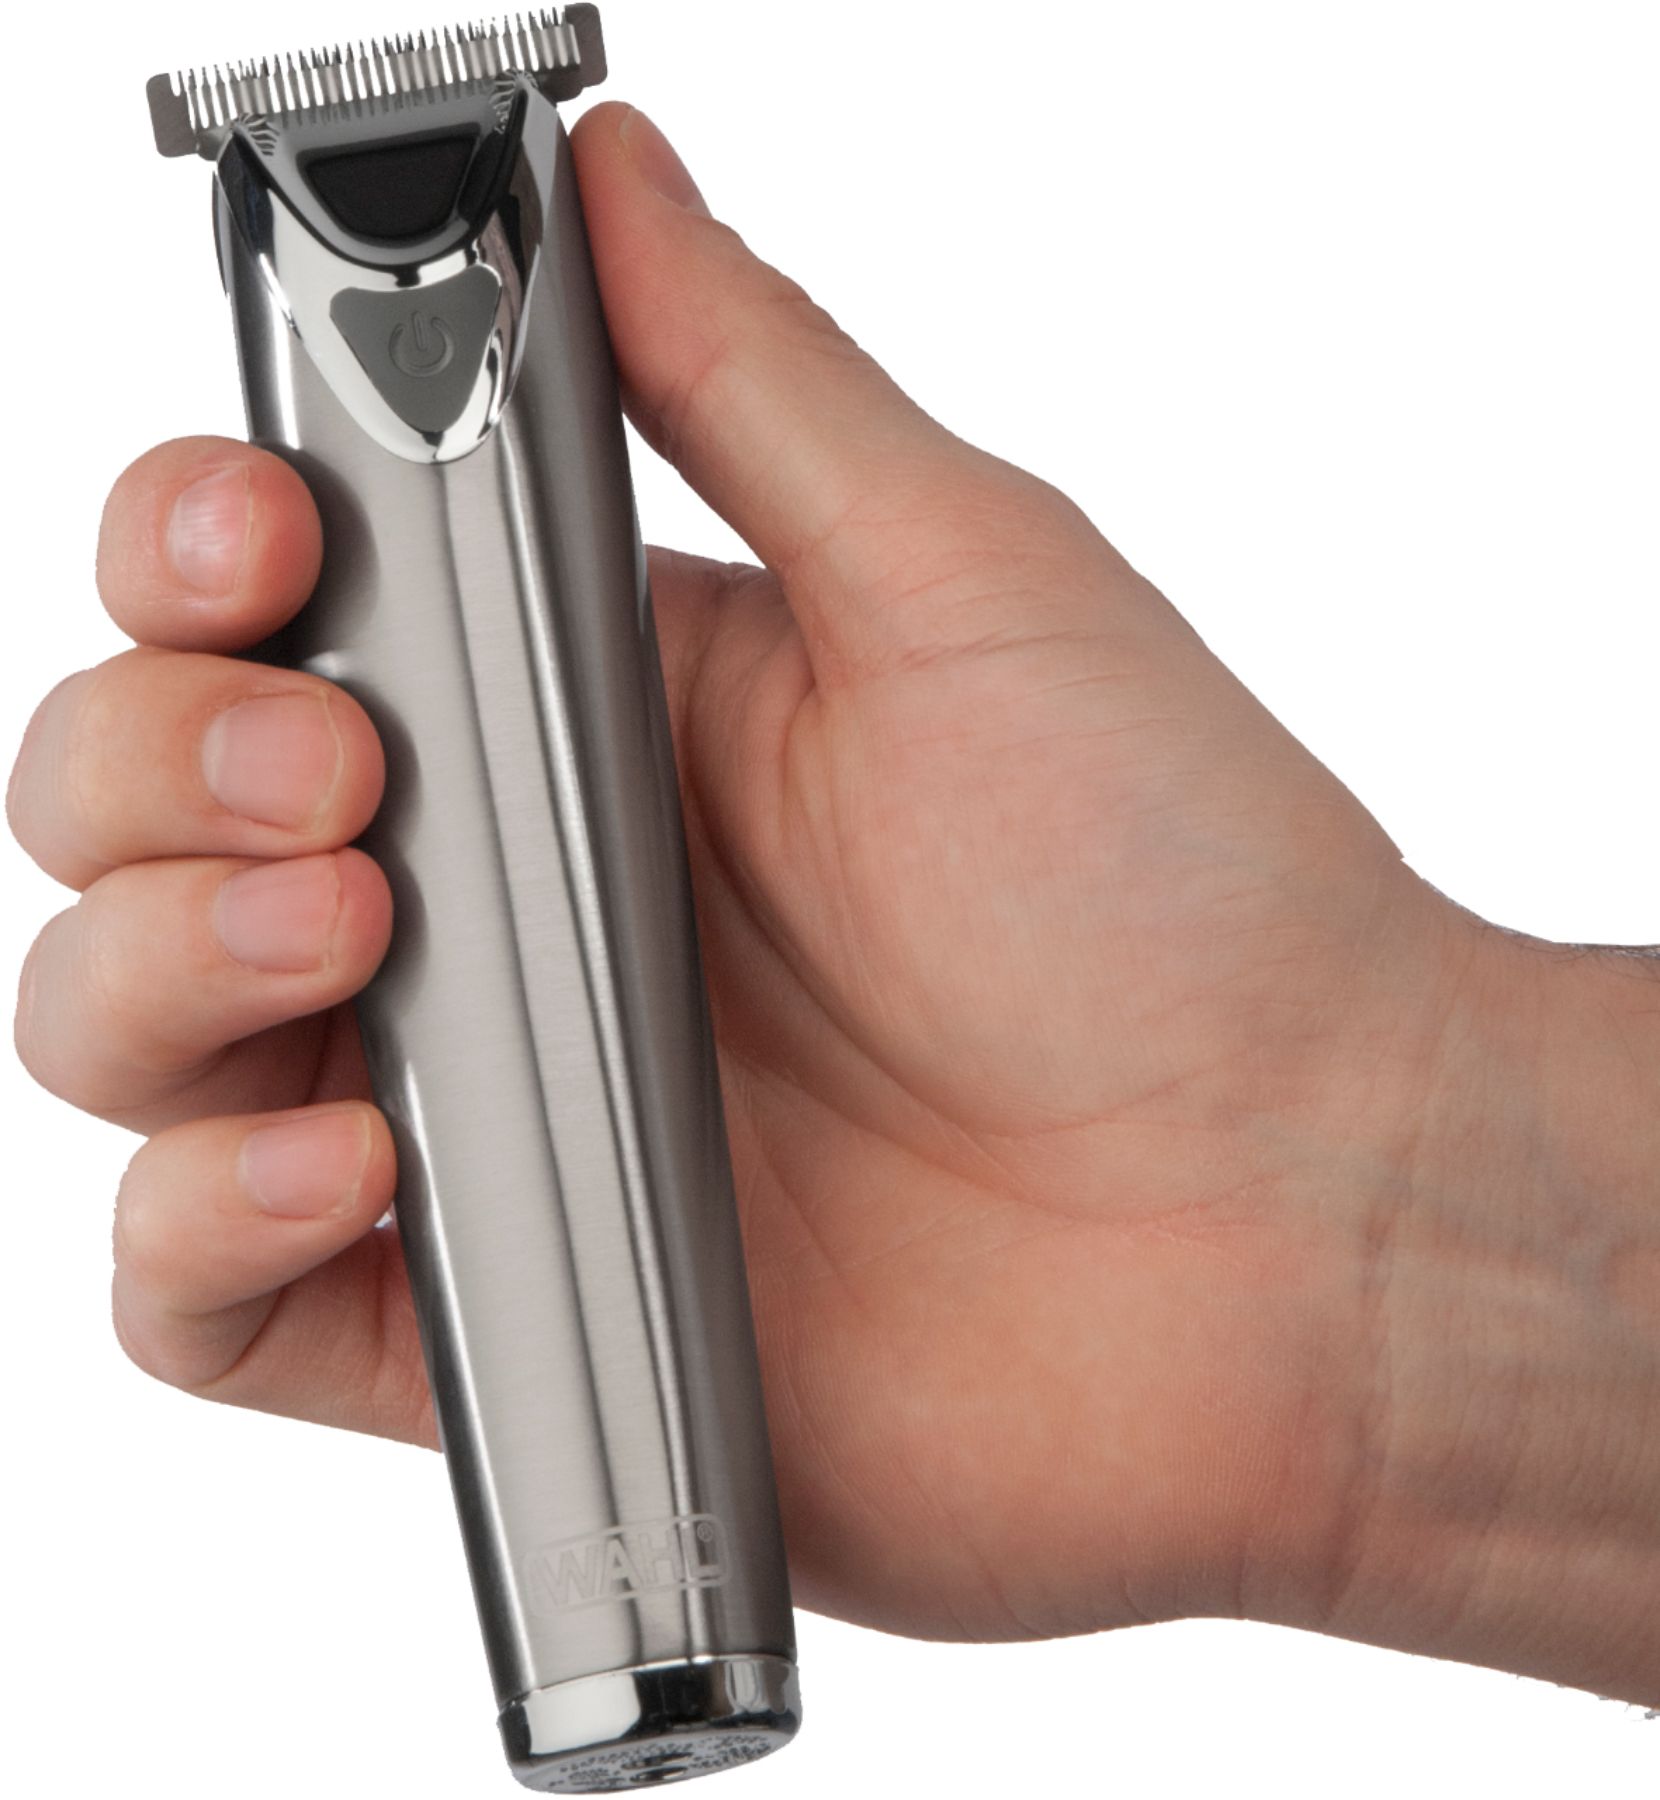 Best Buy: Wahl Lithium Ion All-In-One Trimmer Stainless-Steel 9818 Wahl Lithium Ion Stainless Steel